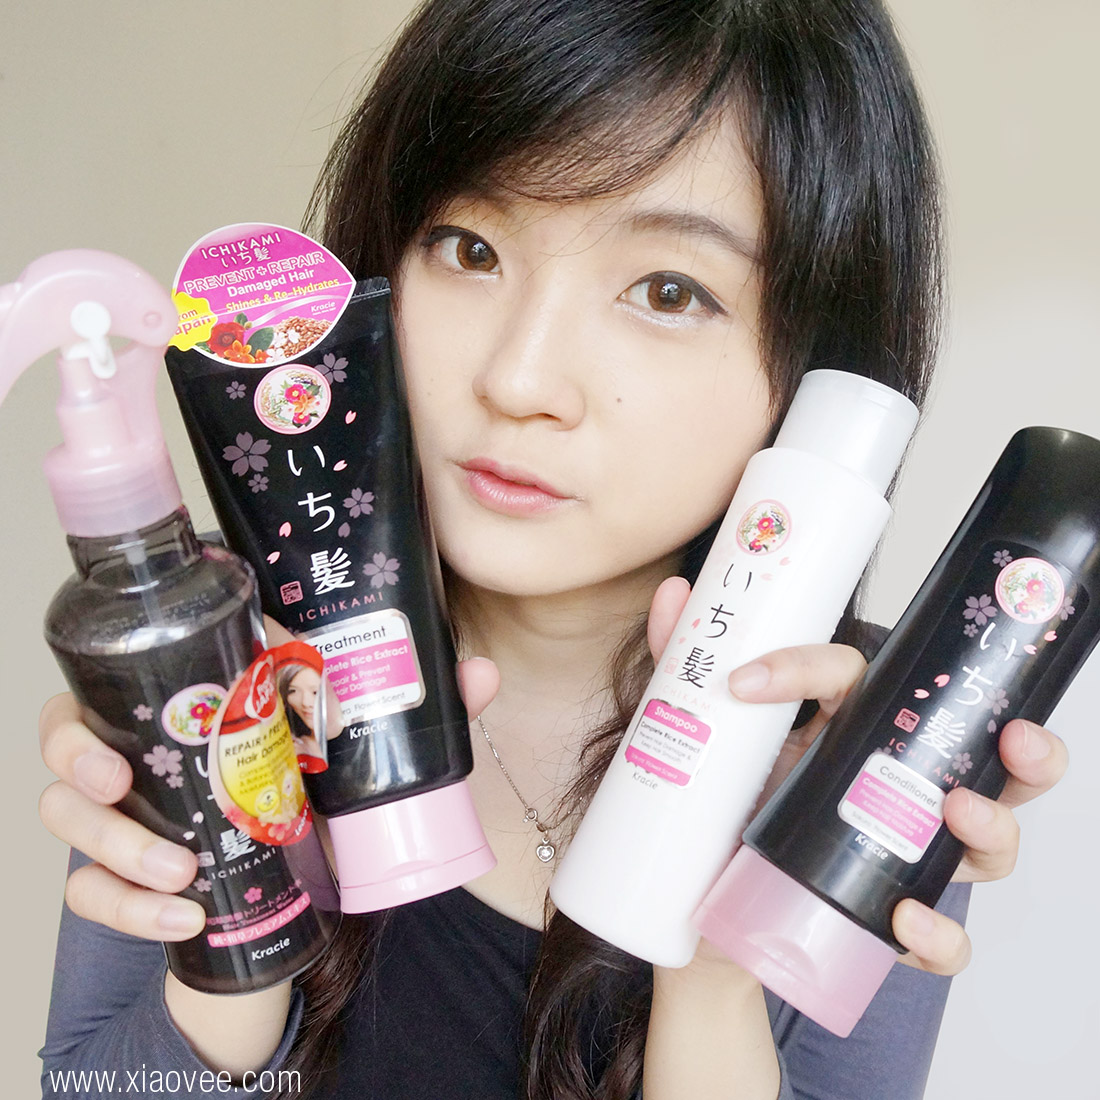 Kracie Ichikami Complete Review, Reviewed by Xiao Vee, Indonesian Beauty Blogger, Beauty Blogger Indonesia